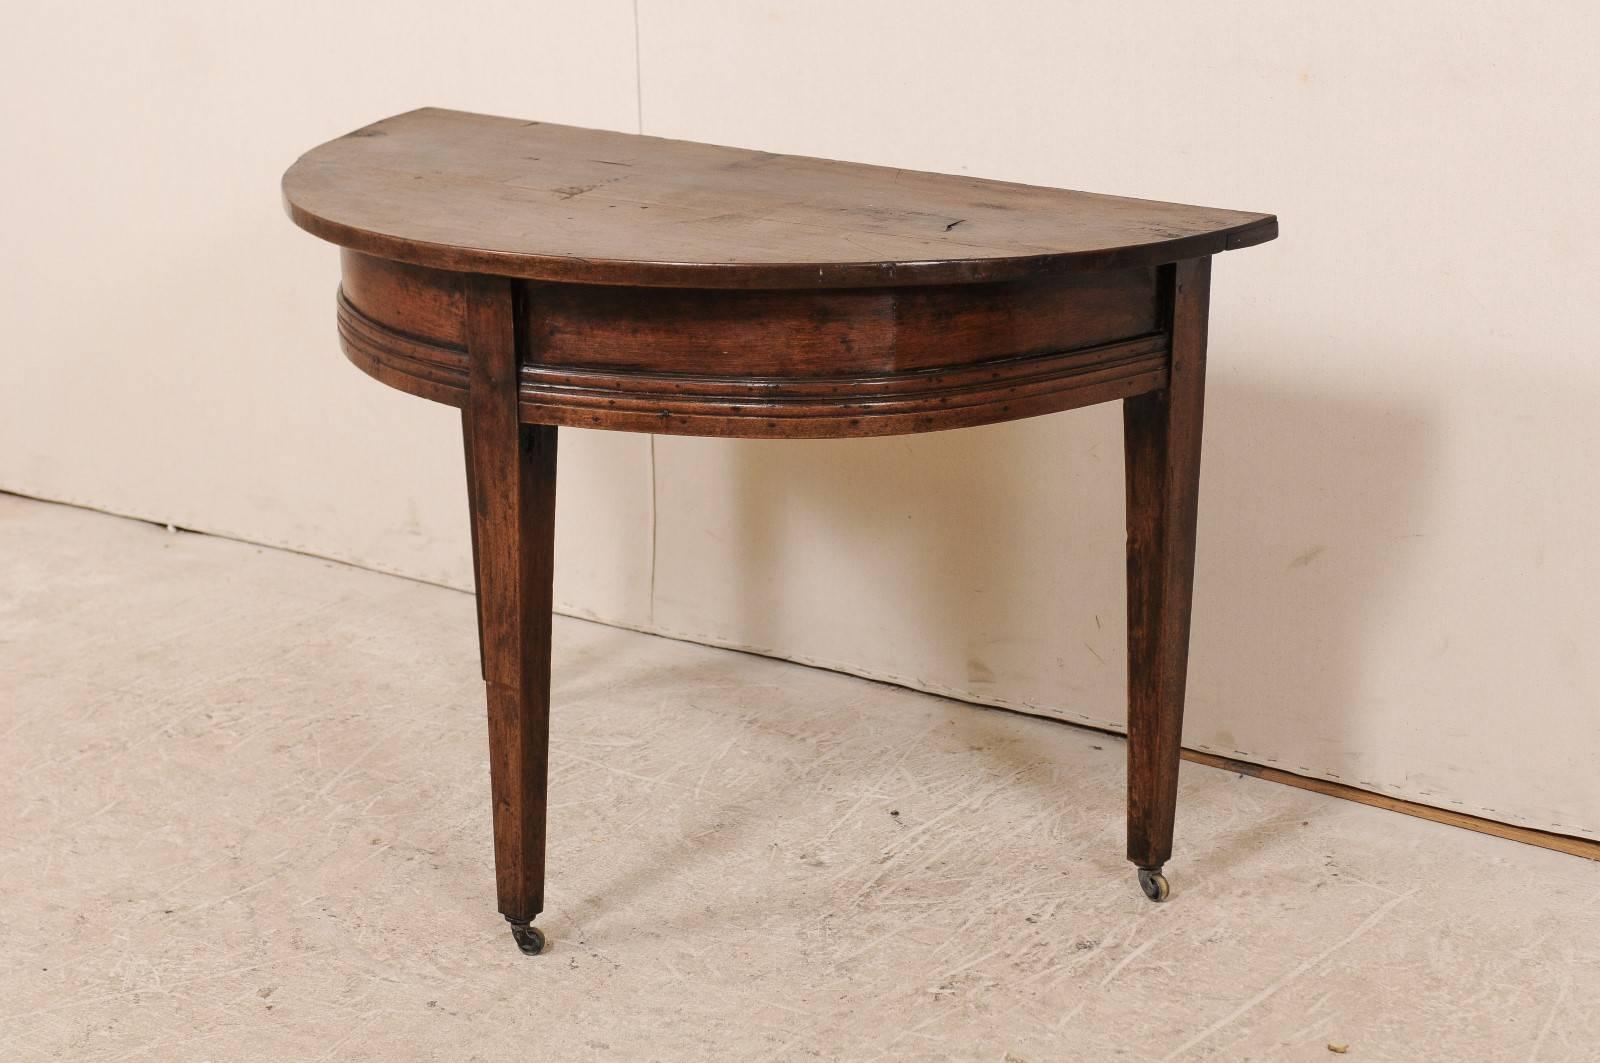 Carved Late 18th Century Italian Rich Walnut Wood Demilune with Petite Wheel Feel